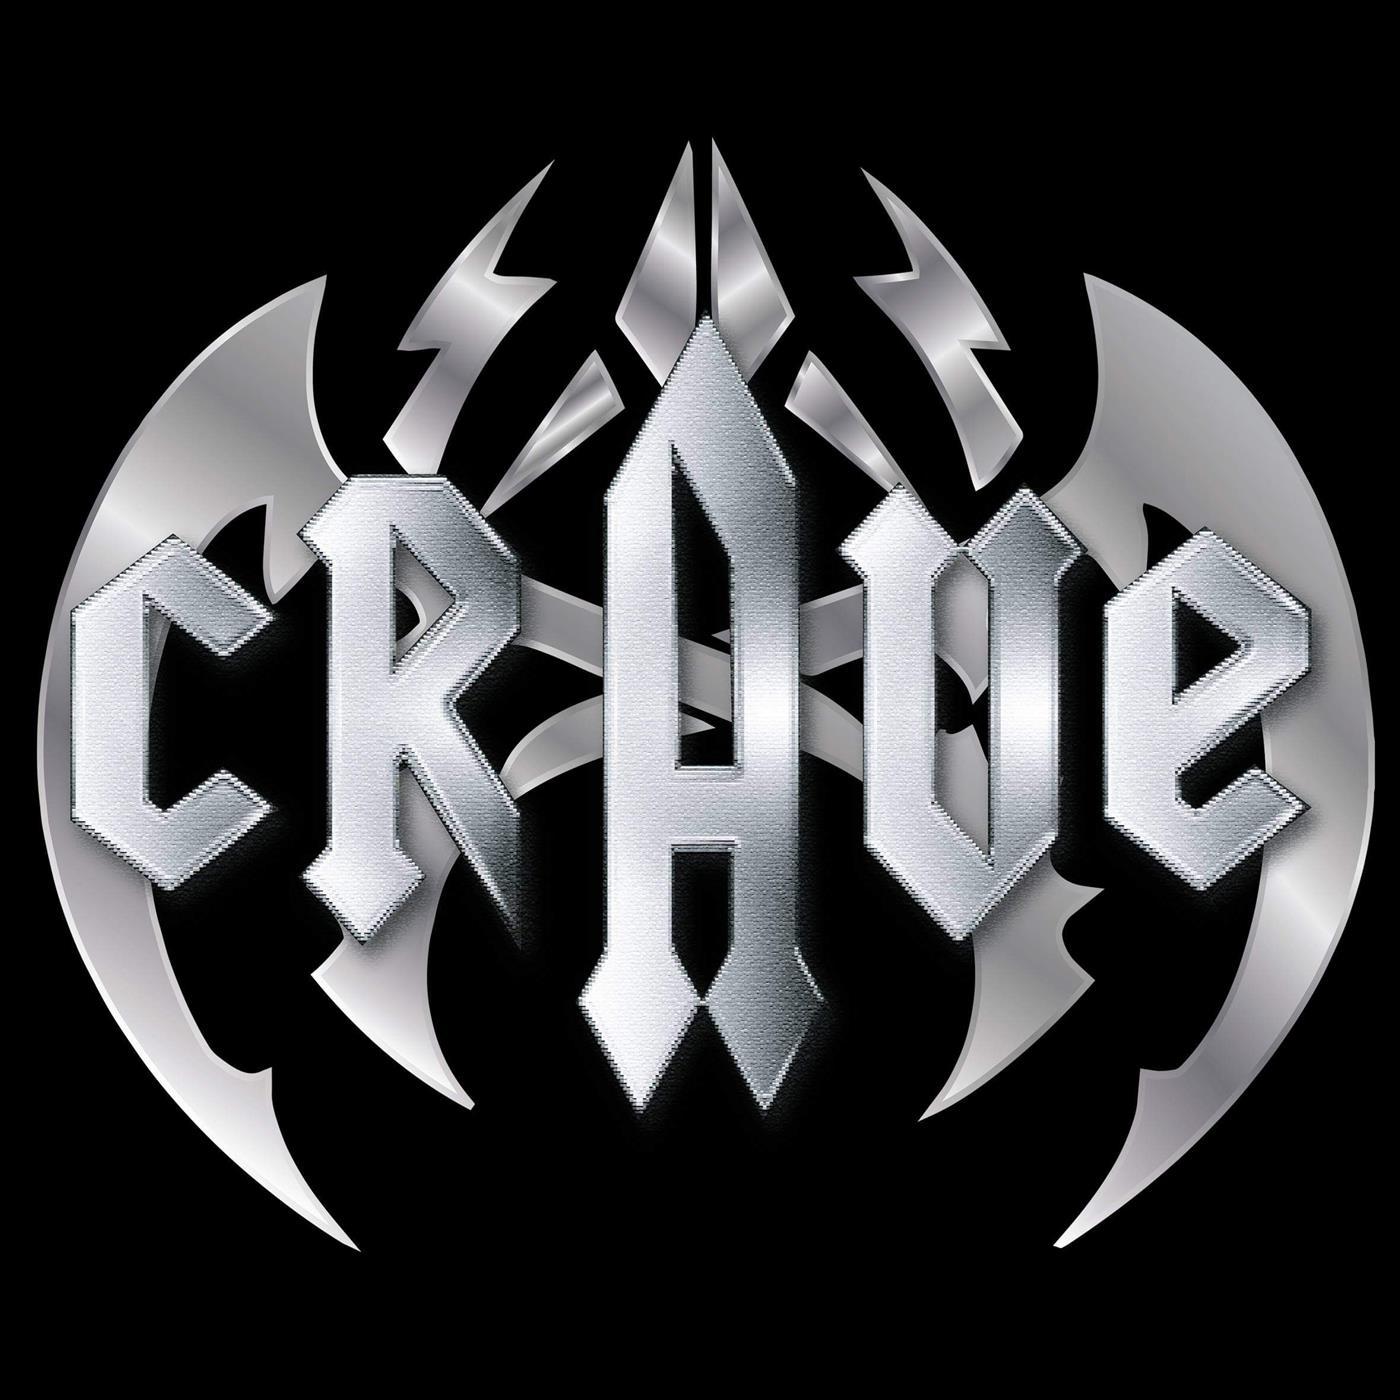 Crave - Hole in the Wall